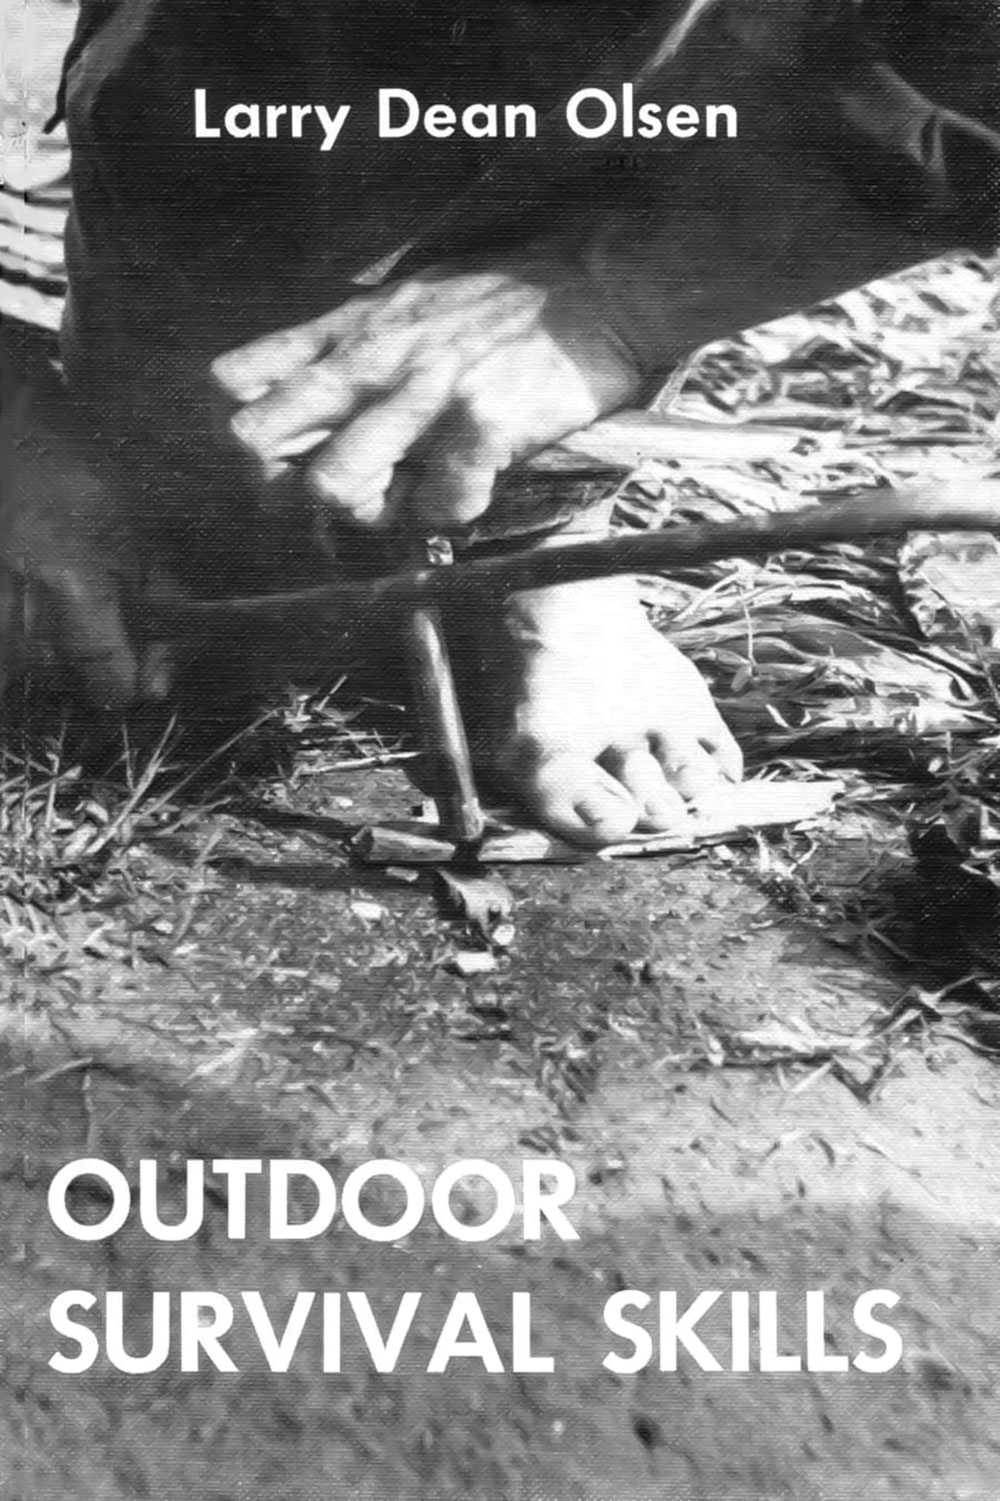 The original cover of Larry Dean Olsen’s first edition of Outdoor Survival Skills (Photo: Dave Wescott)